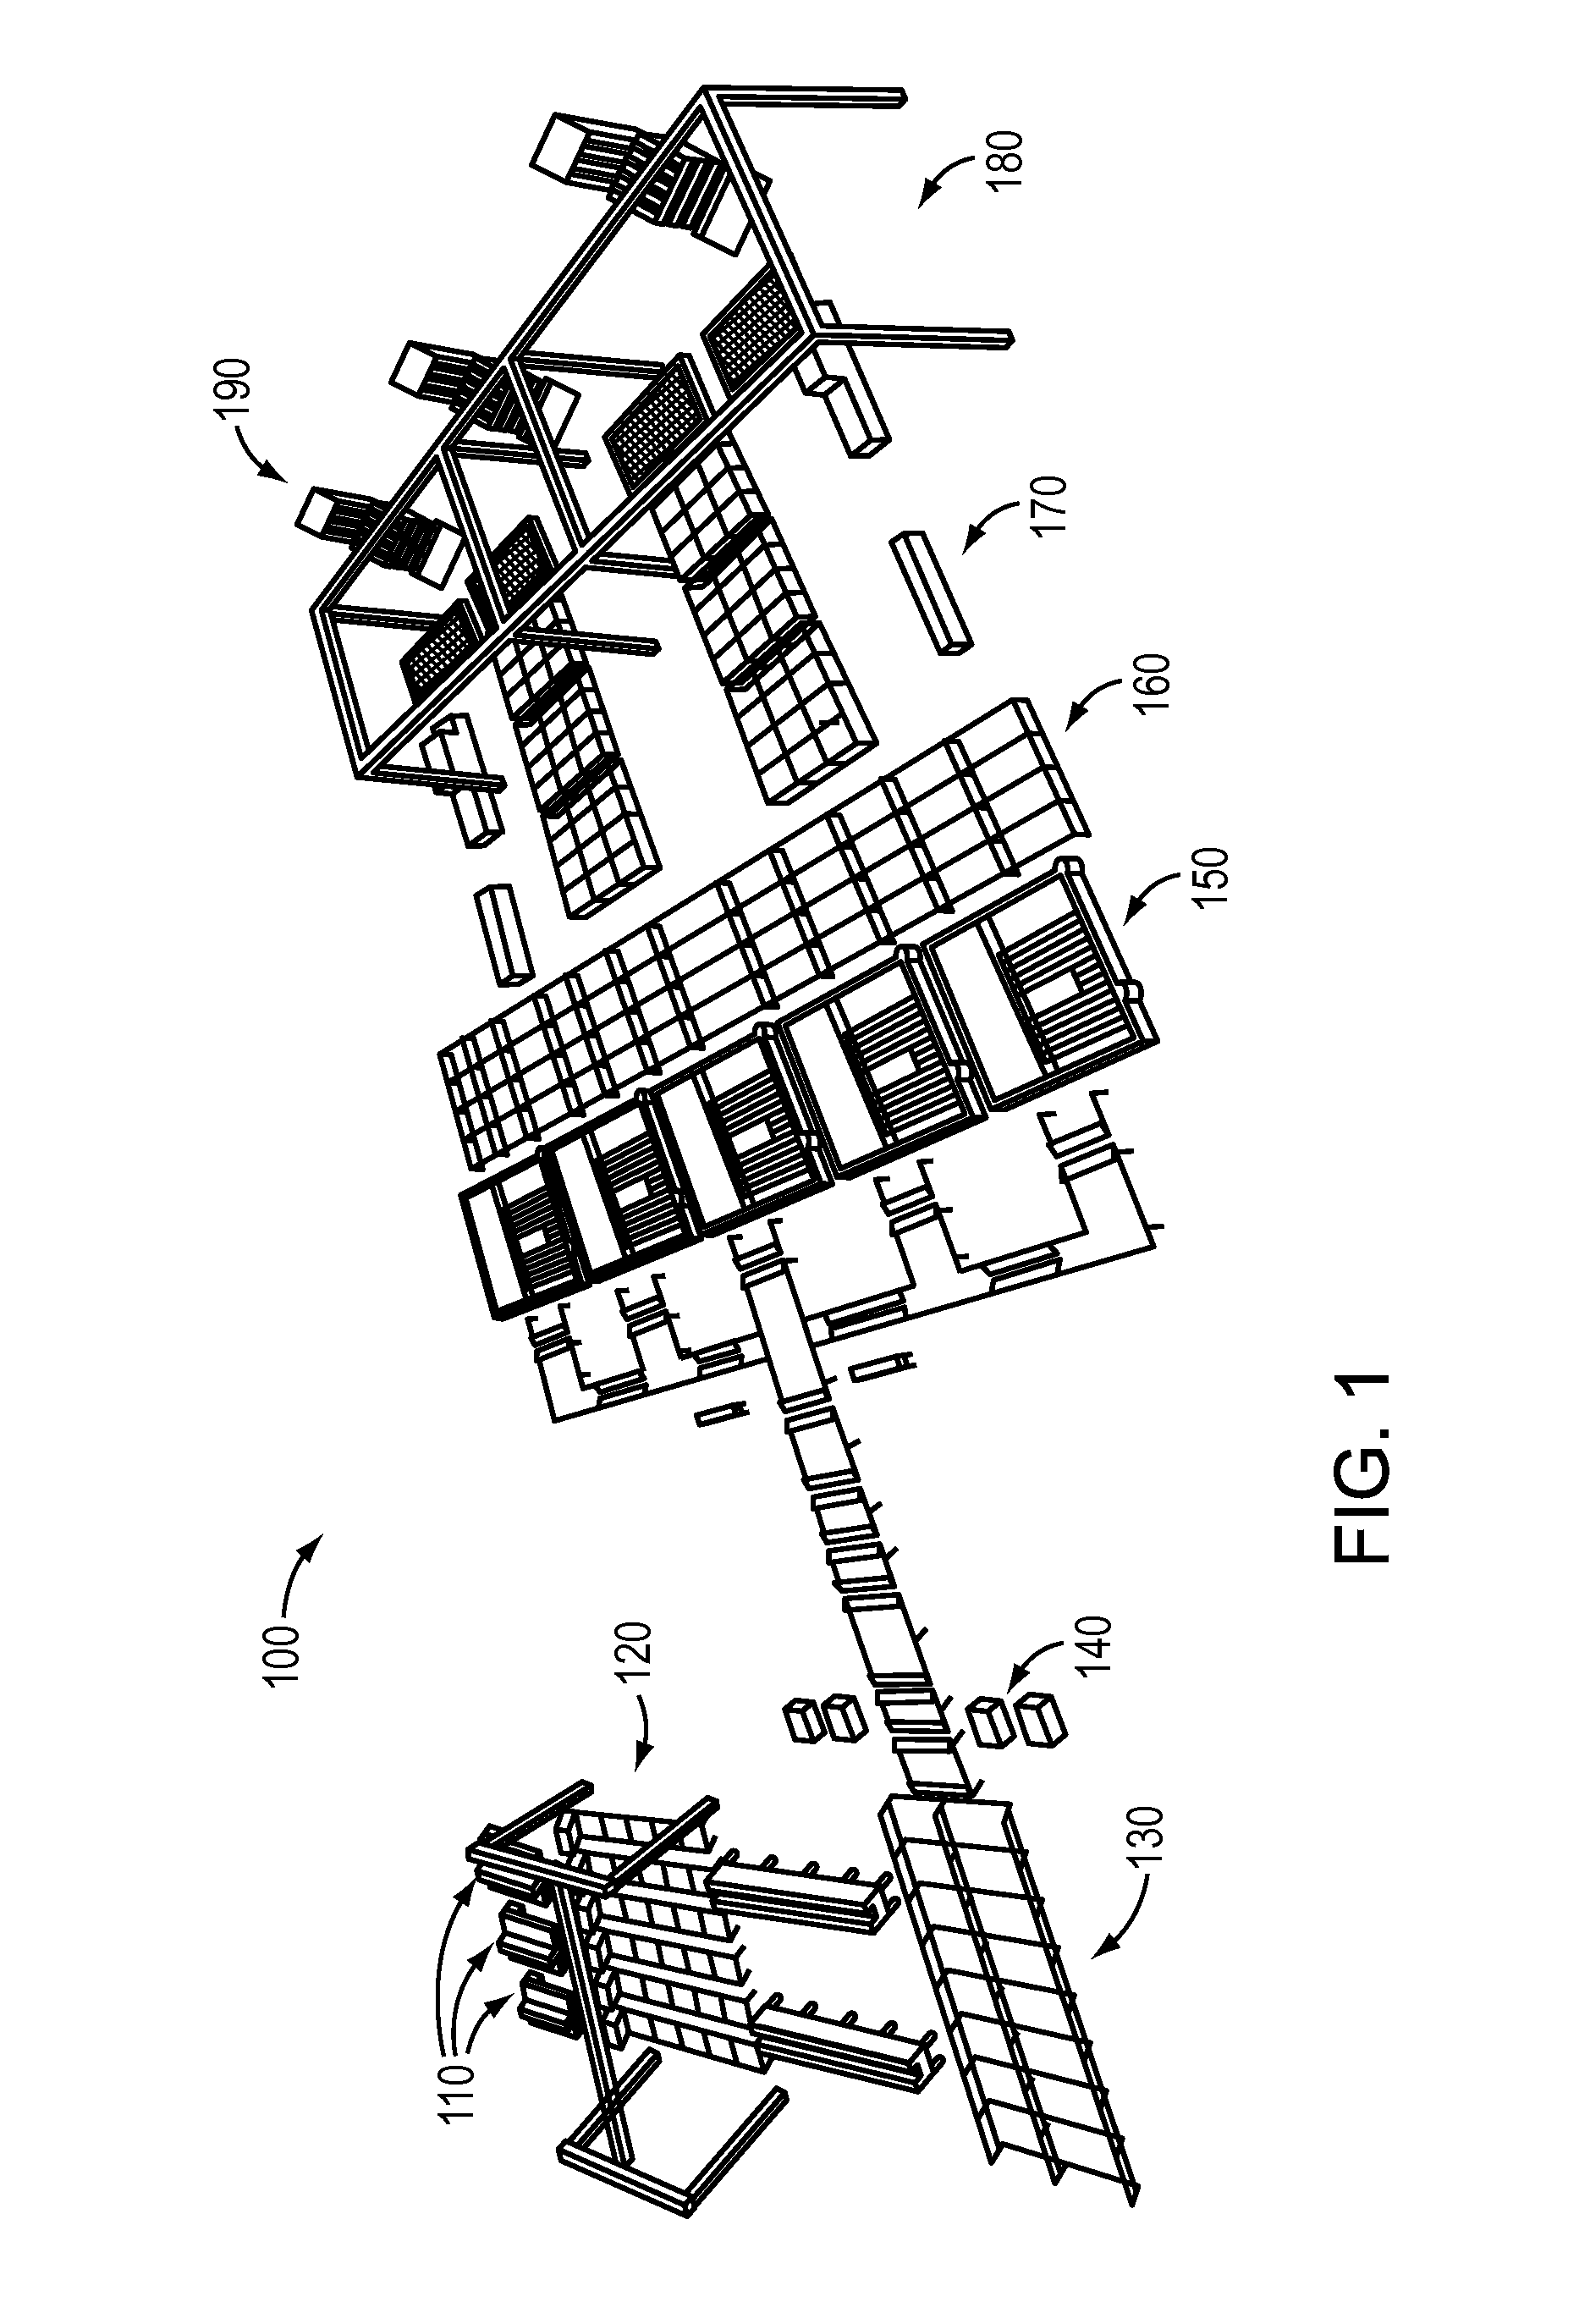 Component manufacturing system for a prefabricated building panel